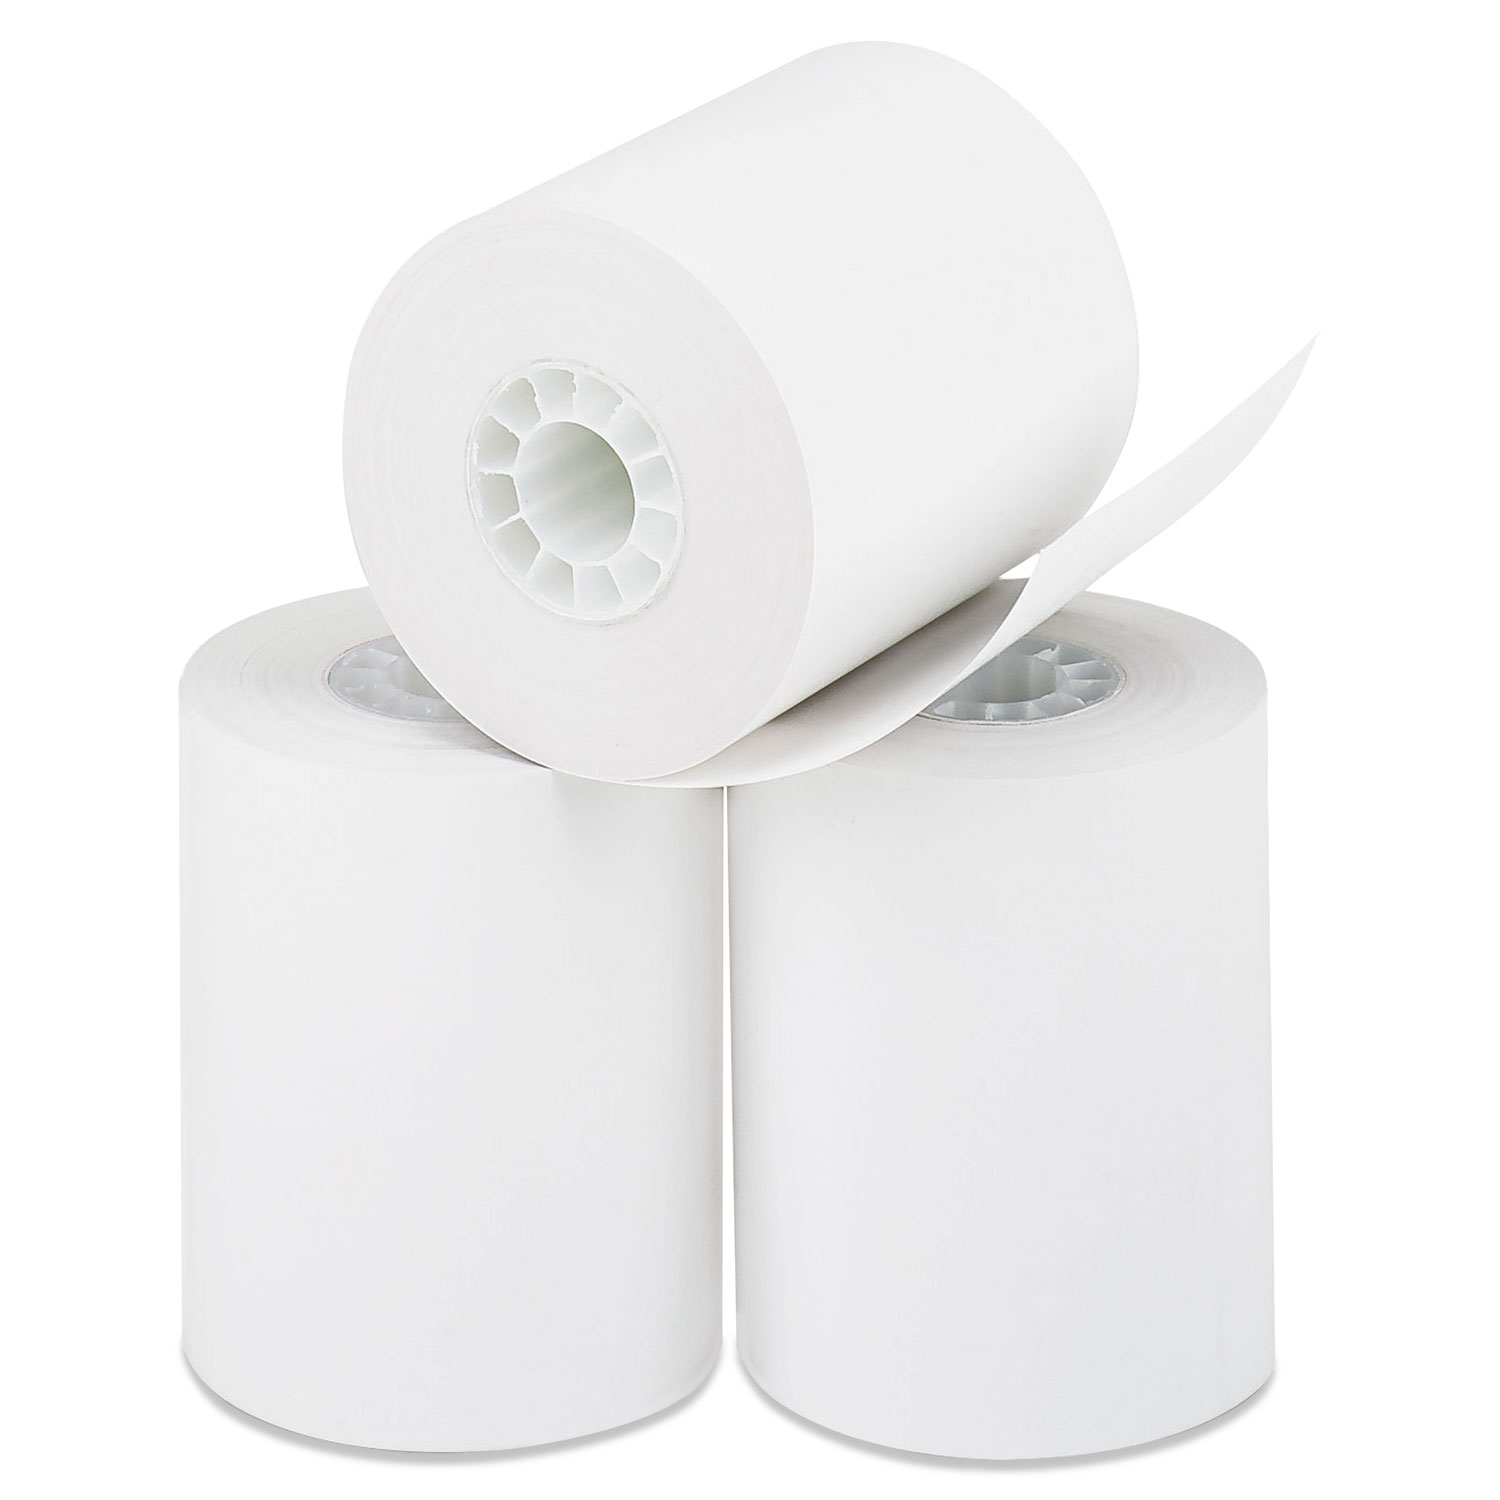  Iconex PMC07903 Direct Thermal Printing Paper Rolls, 0.45 Core, 2.25 x 85 ft, White, 50/Carton (ICX90780549) 